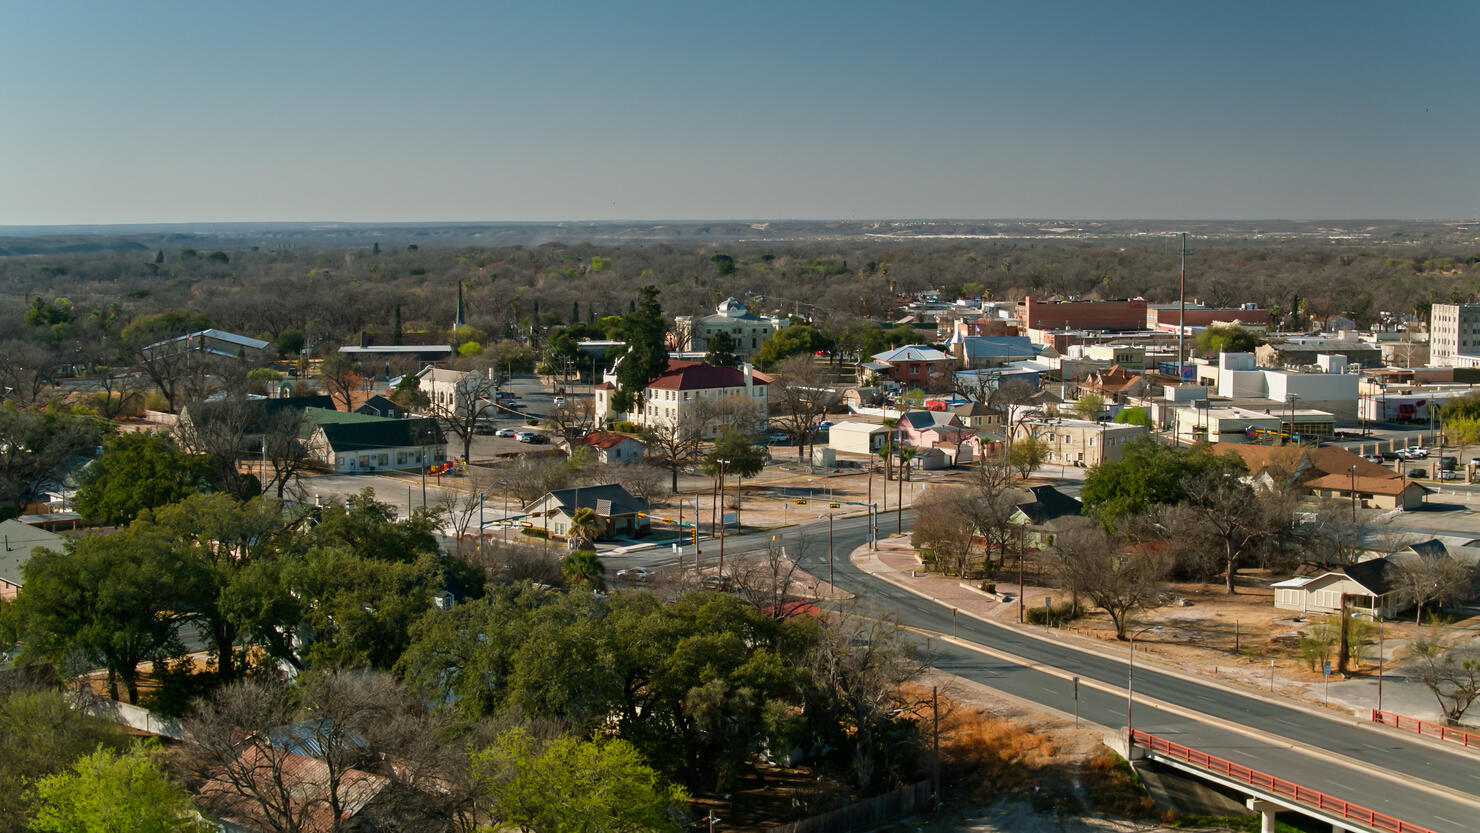 Aerial View of Homes and Small Businesses in Del Rio, Texas